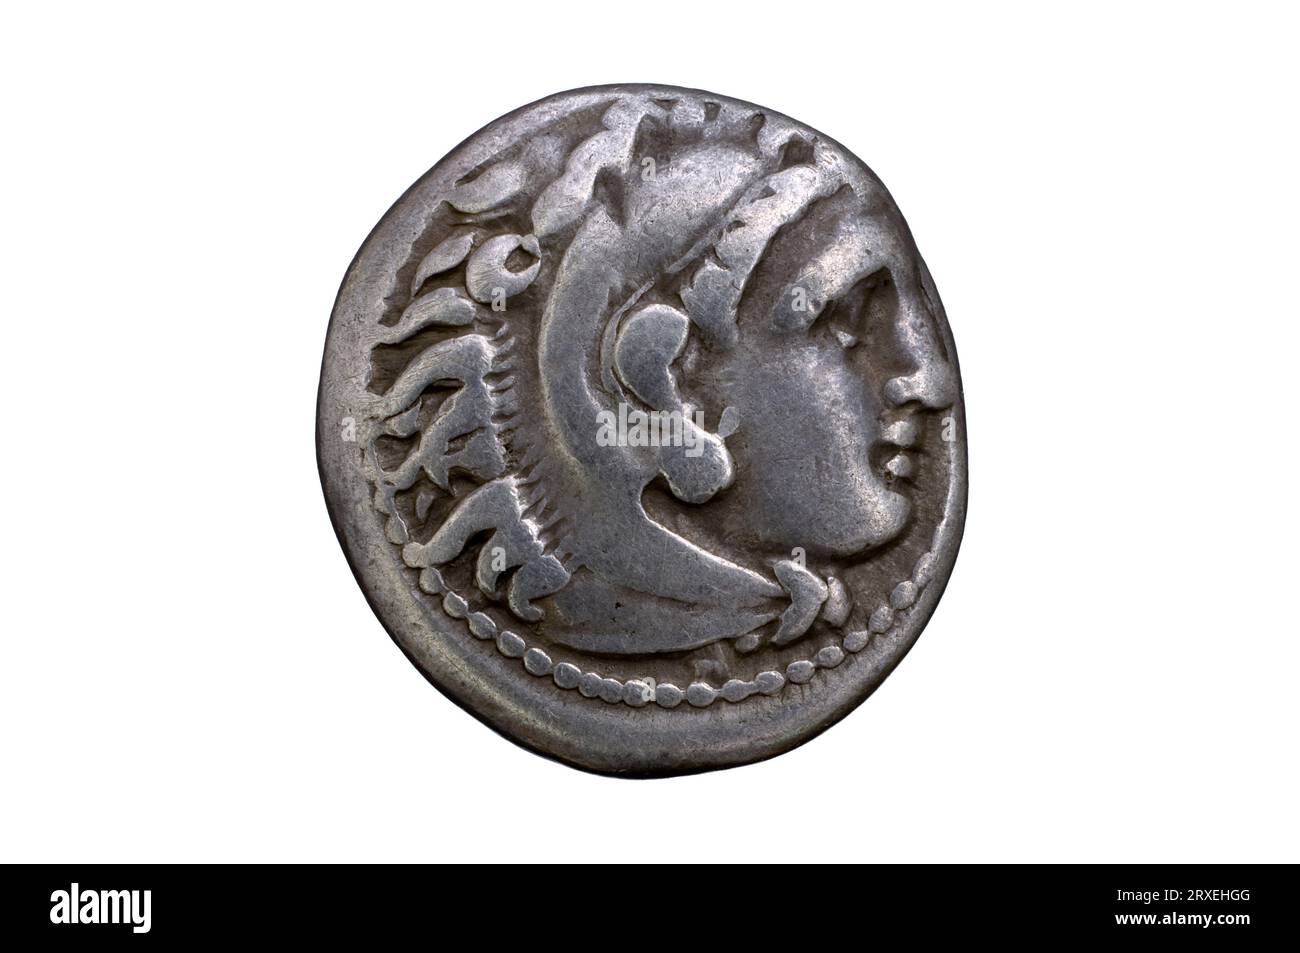 Coin of Alexander the Great Stock Photo